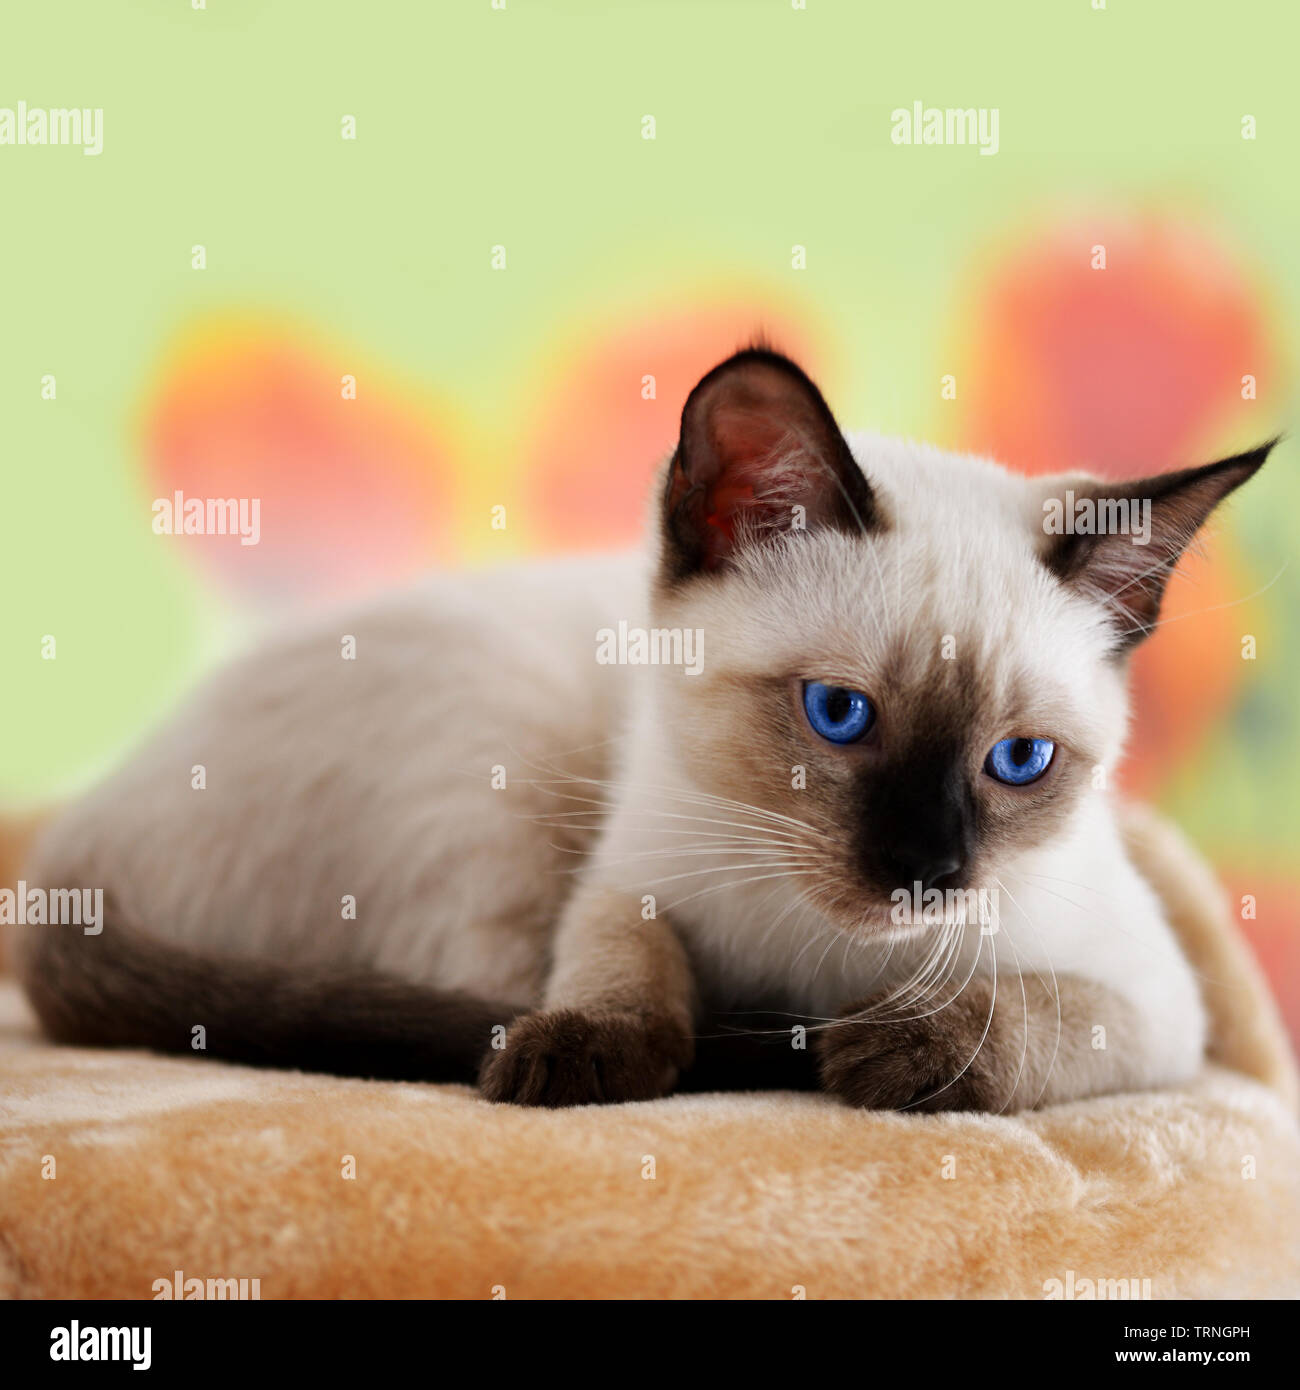 Siamese kitten with bright blue eyes on a blurred background. Stock Photo